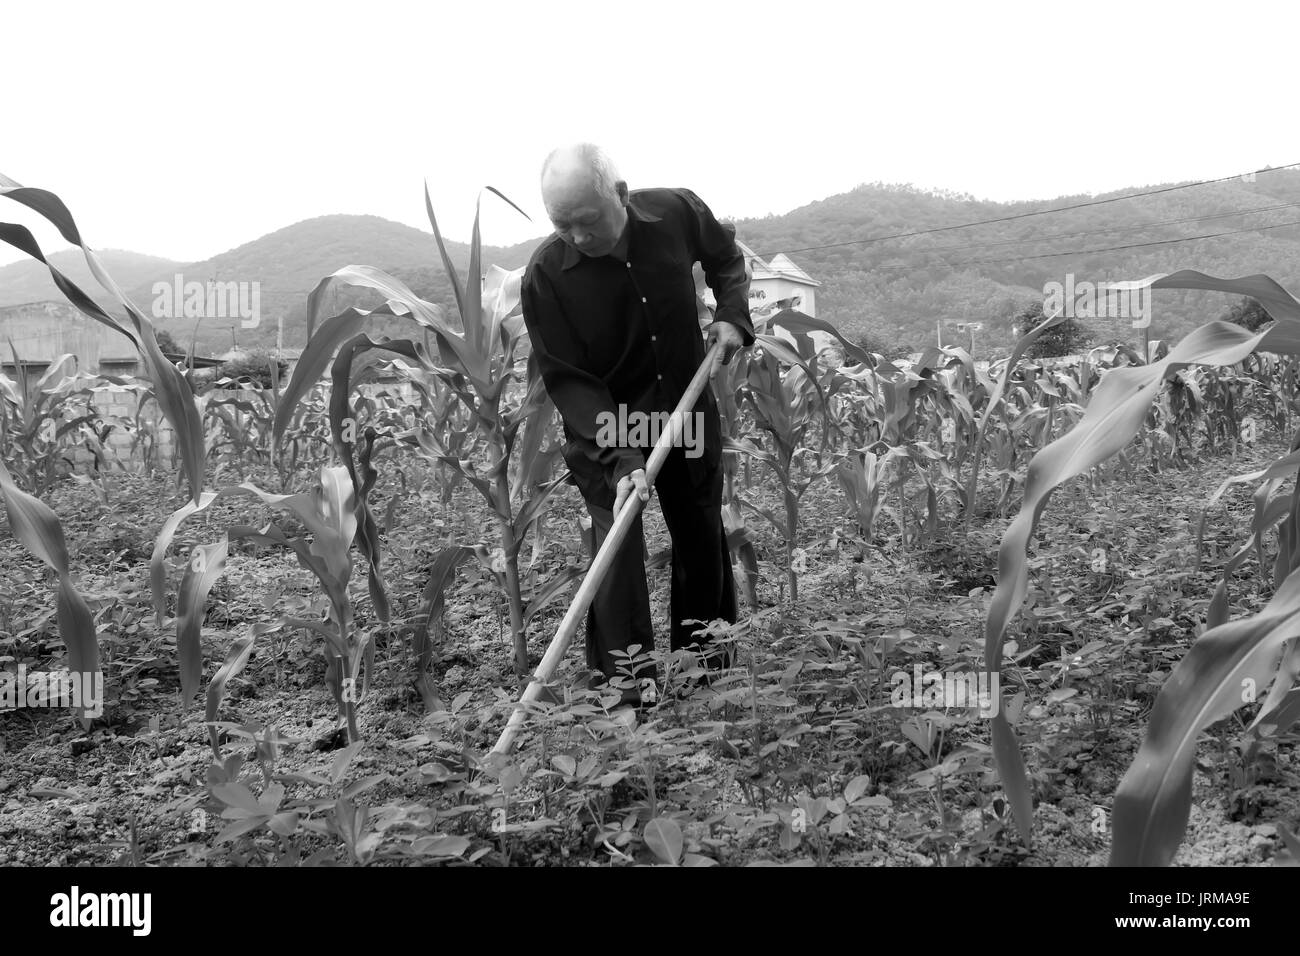 HAI DUONG, VIETNAM, April 20: Old man with a hoe weeding in the corn field on April 20, 2014 in Hai Duong, Vietnam. Stock Photo